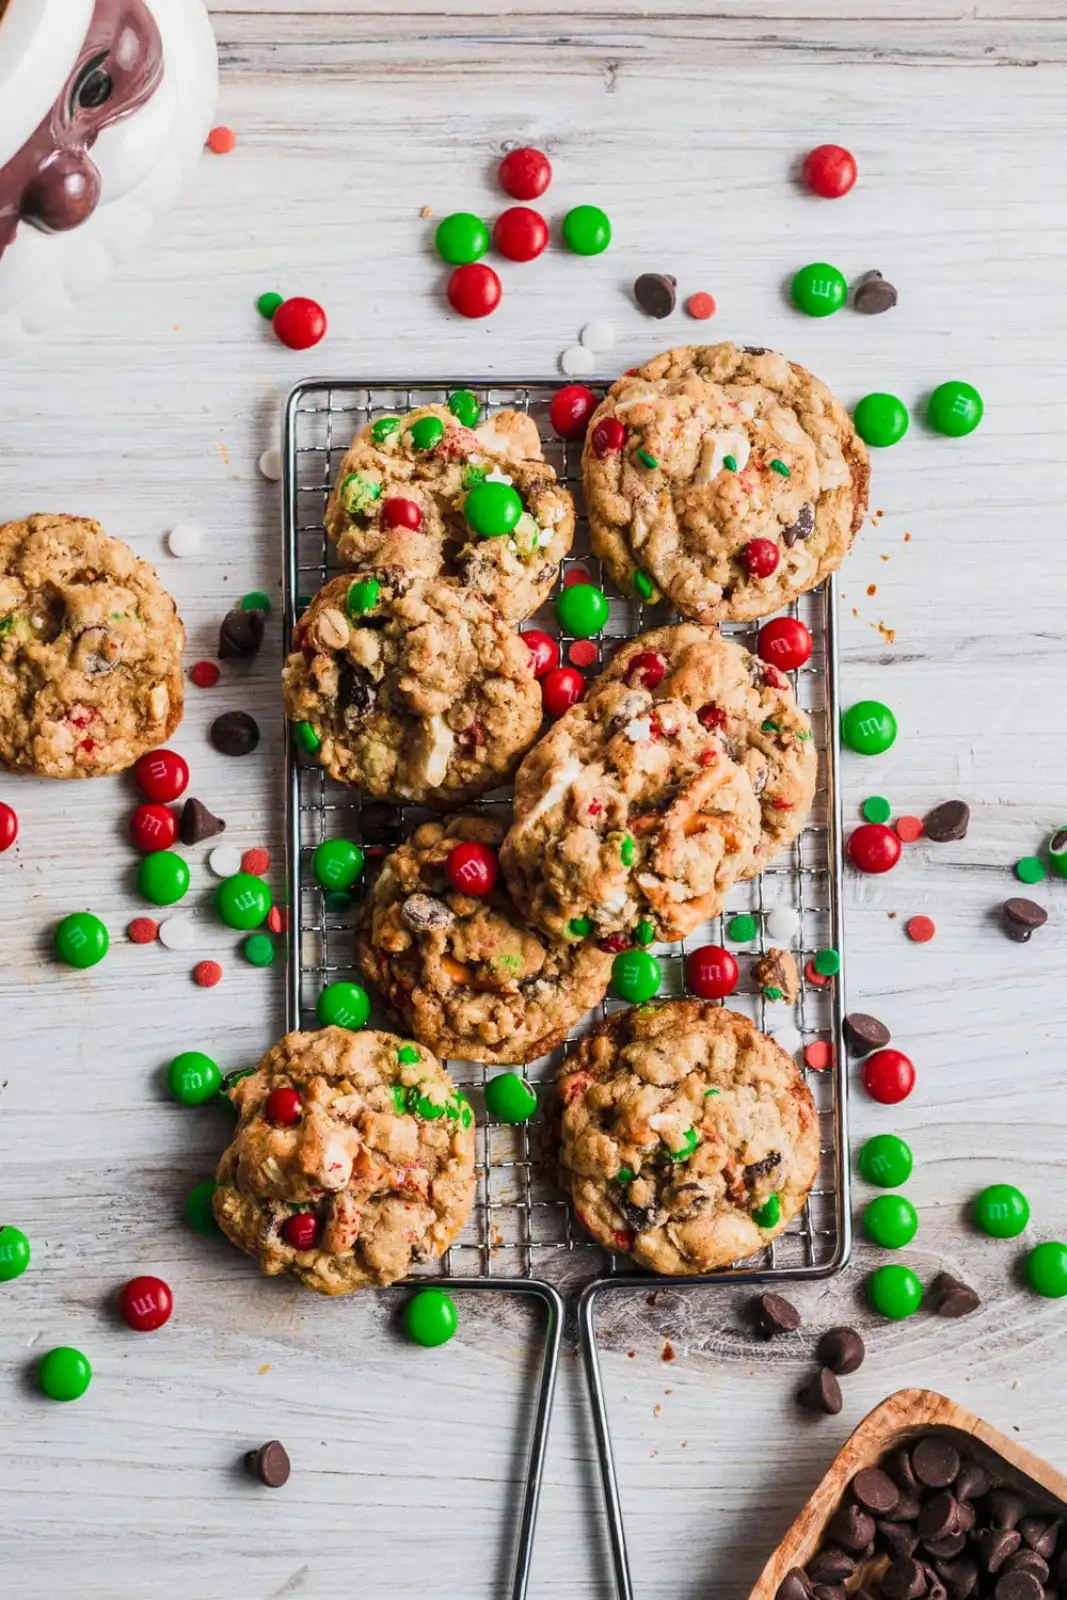 Oatmeal cookies with M&Ms and filled with chocolate chips and pretzels.